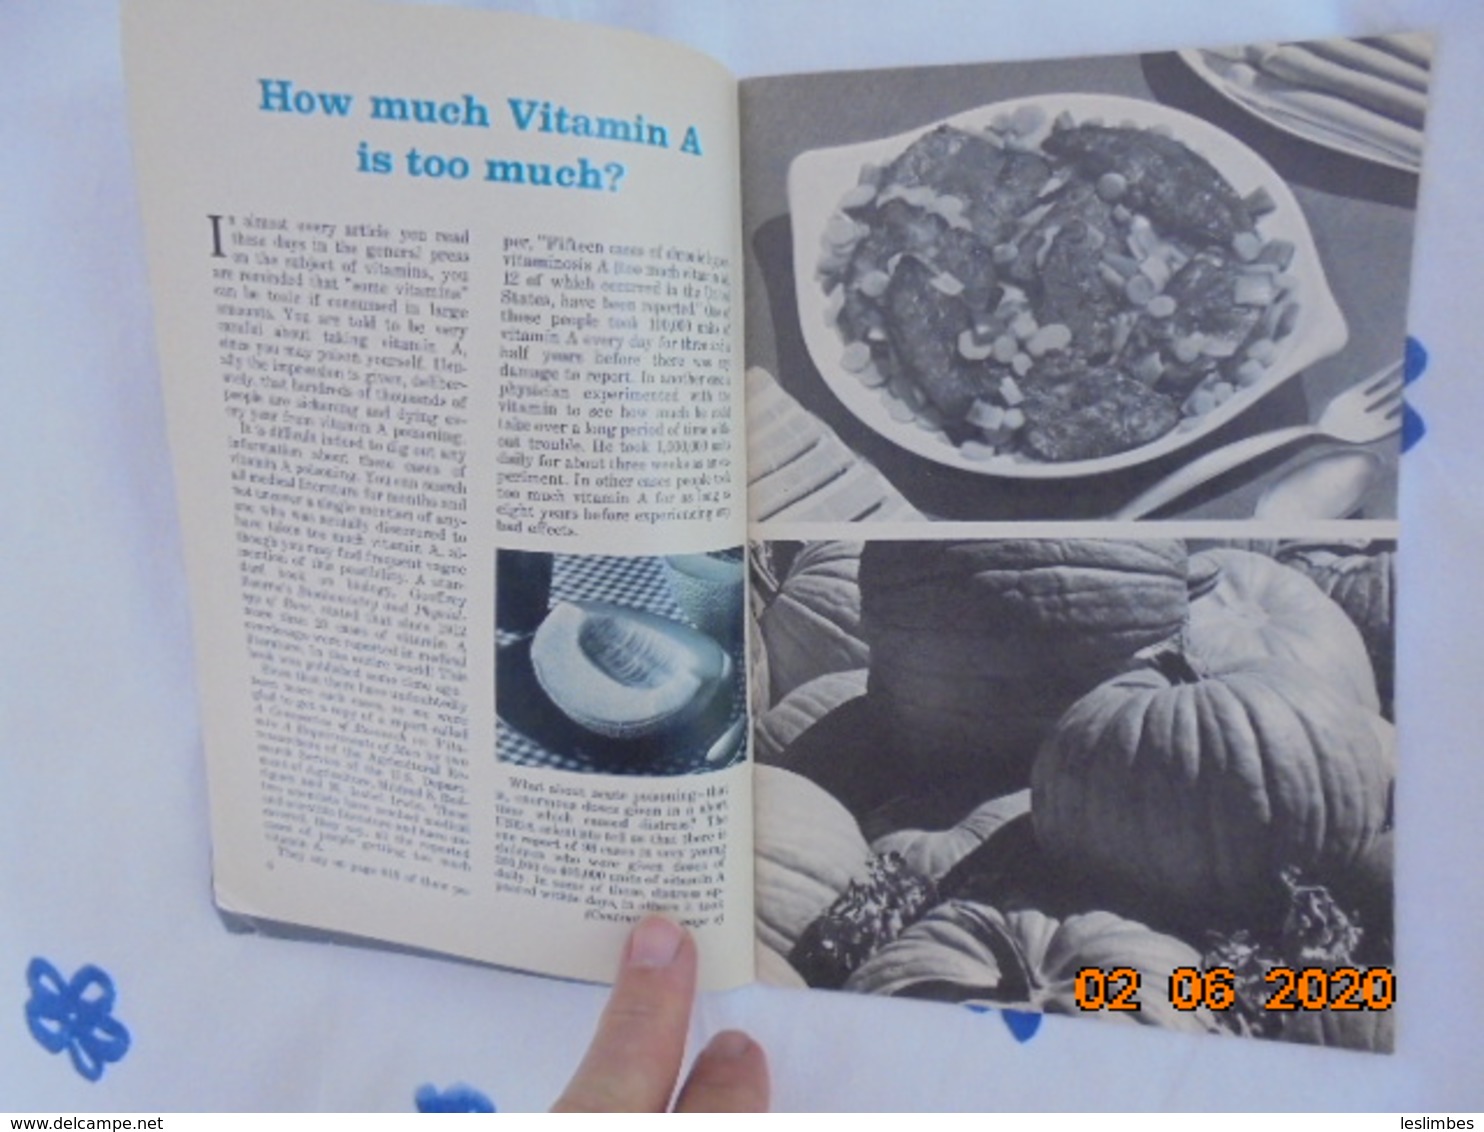 Today's Living, Volume 7 (April 1976) Number 4. Syndicate Magazines / Howard's Nutrition Of Newport Beach - Medicina Alternativa